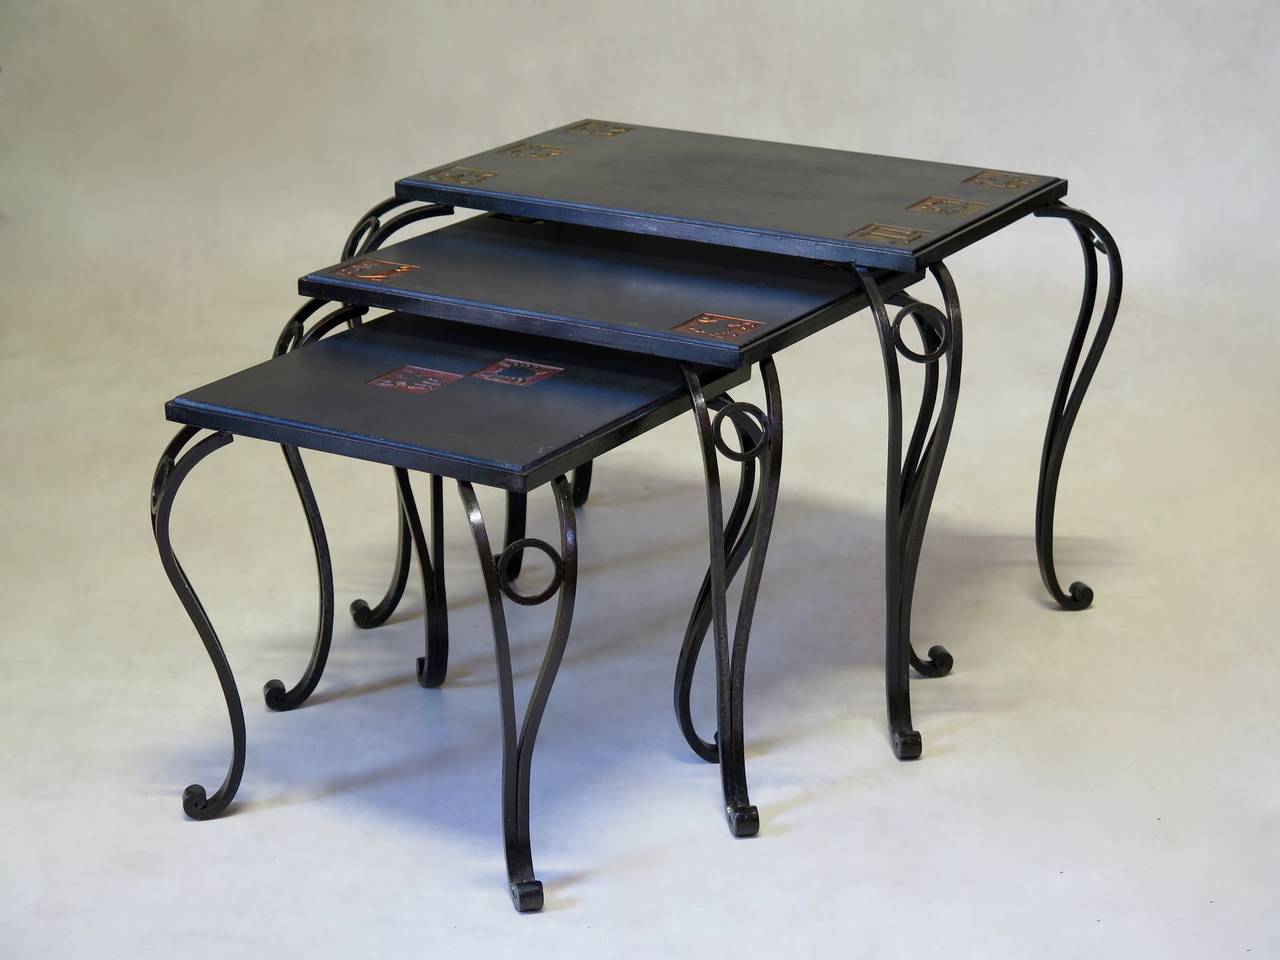 Fun and elegant set of three nesting tables. The slate tops are decorated with star-sign motifs, with yellow, orange and red backgrounds. Raised on wrought-iron cabriole legs.

Dimensions provided below are for the largest table.